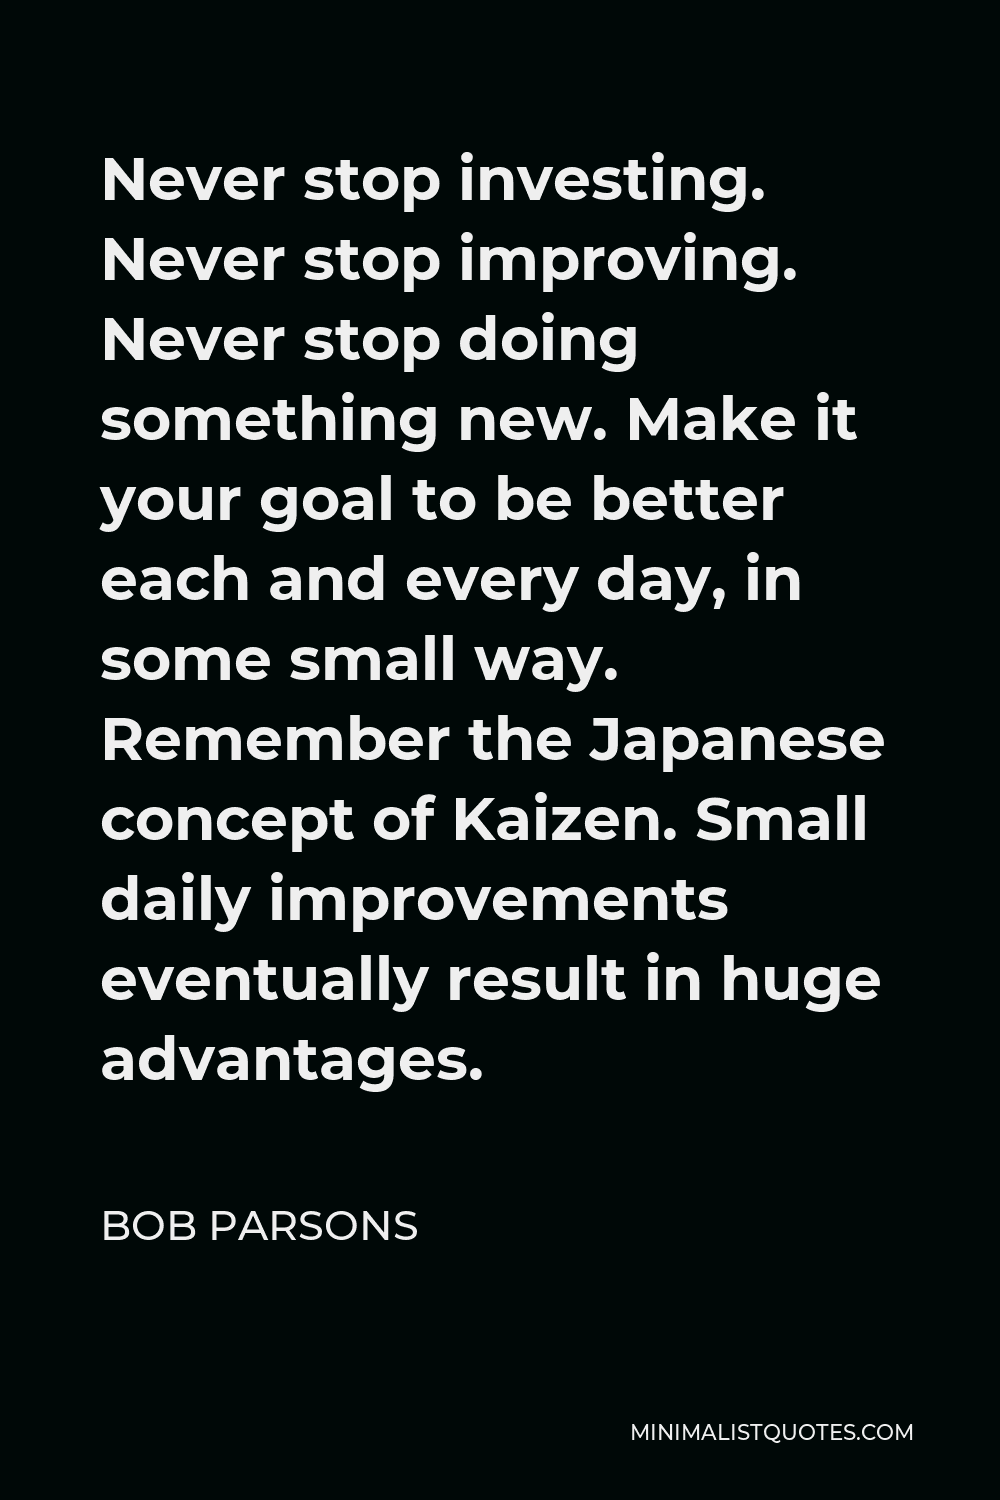 Bob Parsons Quote - Never stop investing. Never stop improving. Never stop doing something new. Make it your goal to be better each and every day, in some small way. Remember the Japanese concept of Kaizen. Small daily improvements eventually result in huge advantages.